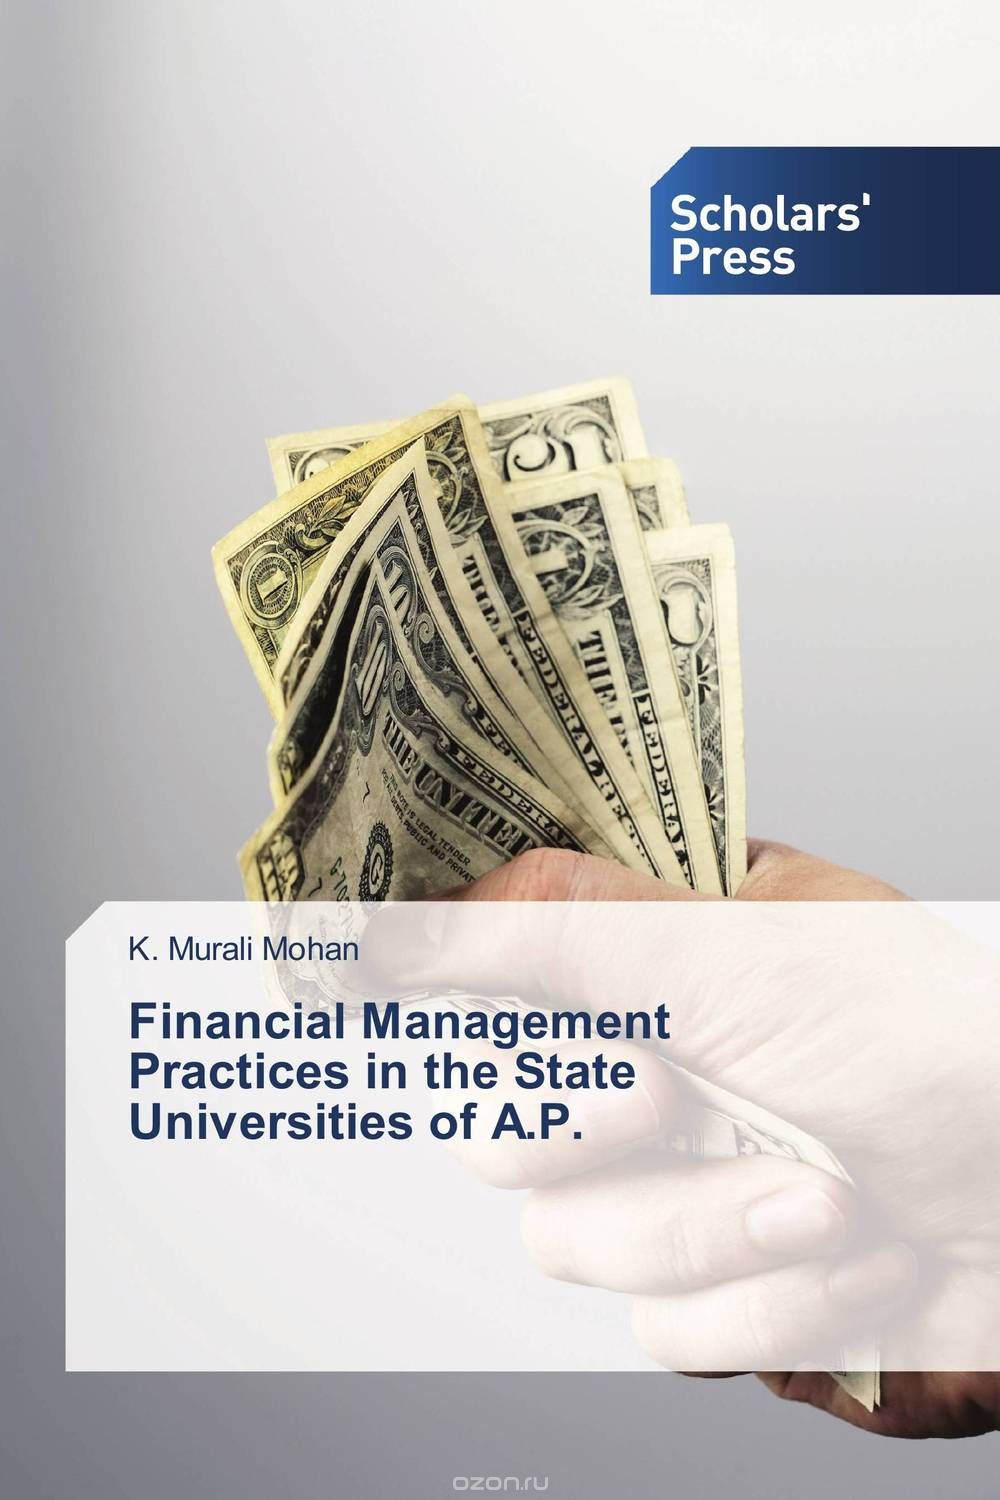 Скачать книгу "Financial Management Practices in the State Universities of A.P."